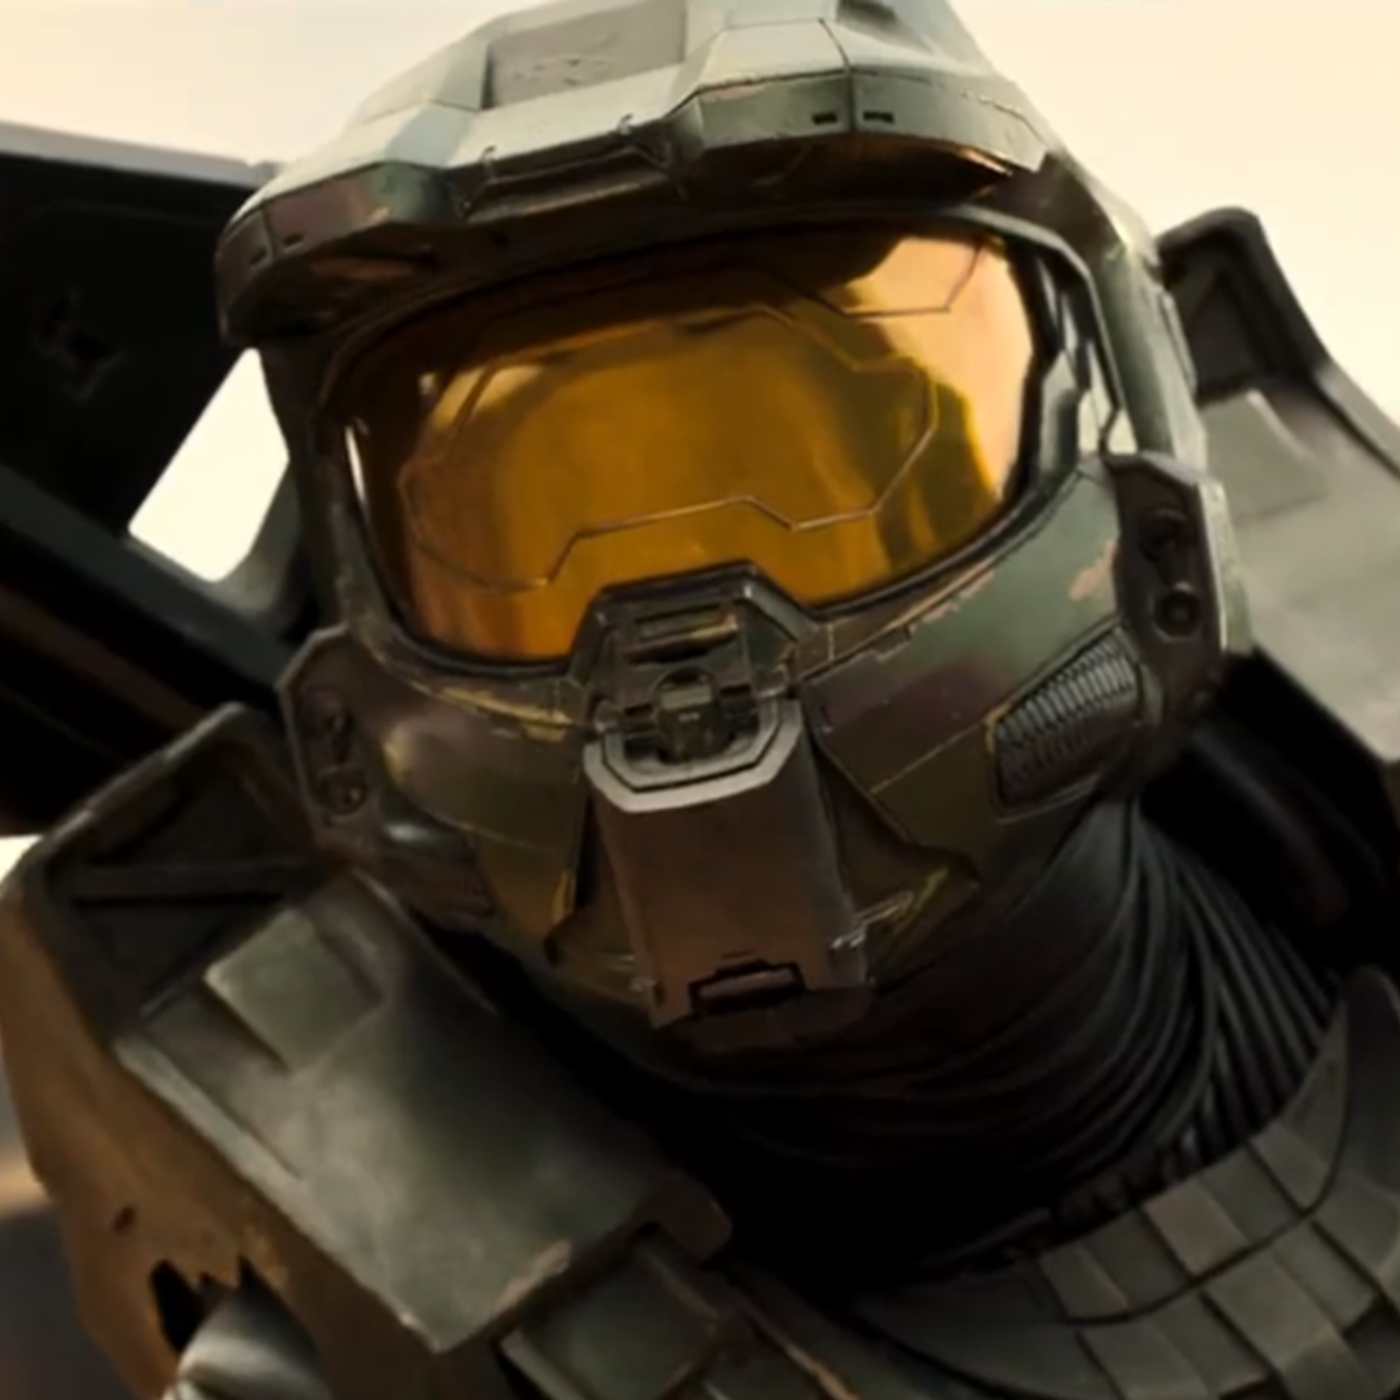 S17 Ep1195: Halo TV series will reveal Master Chief’s face